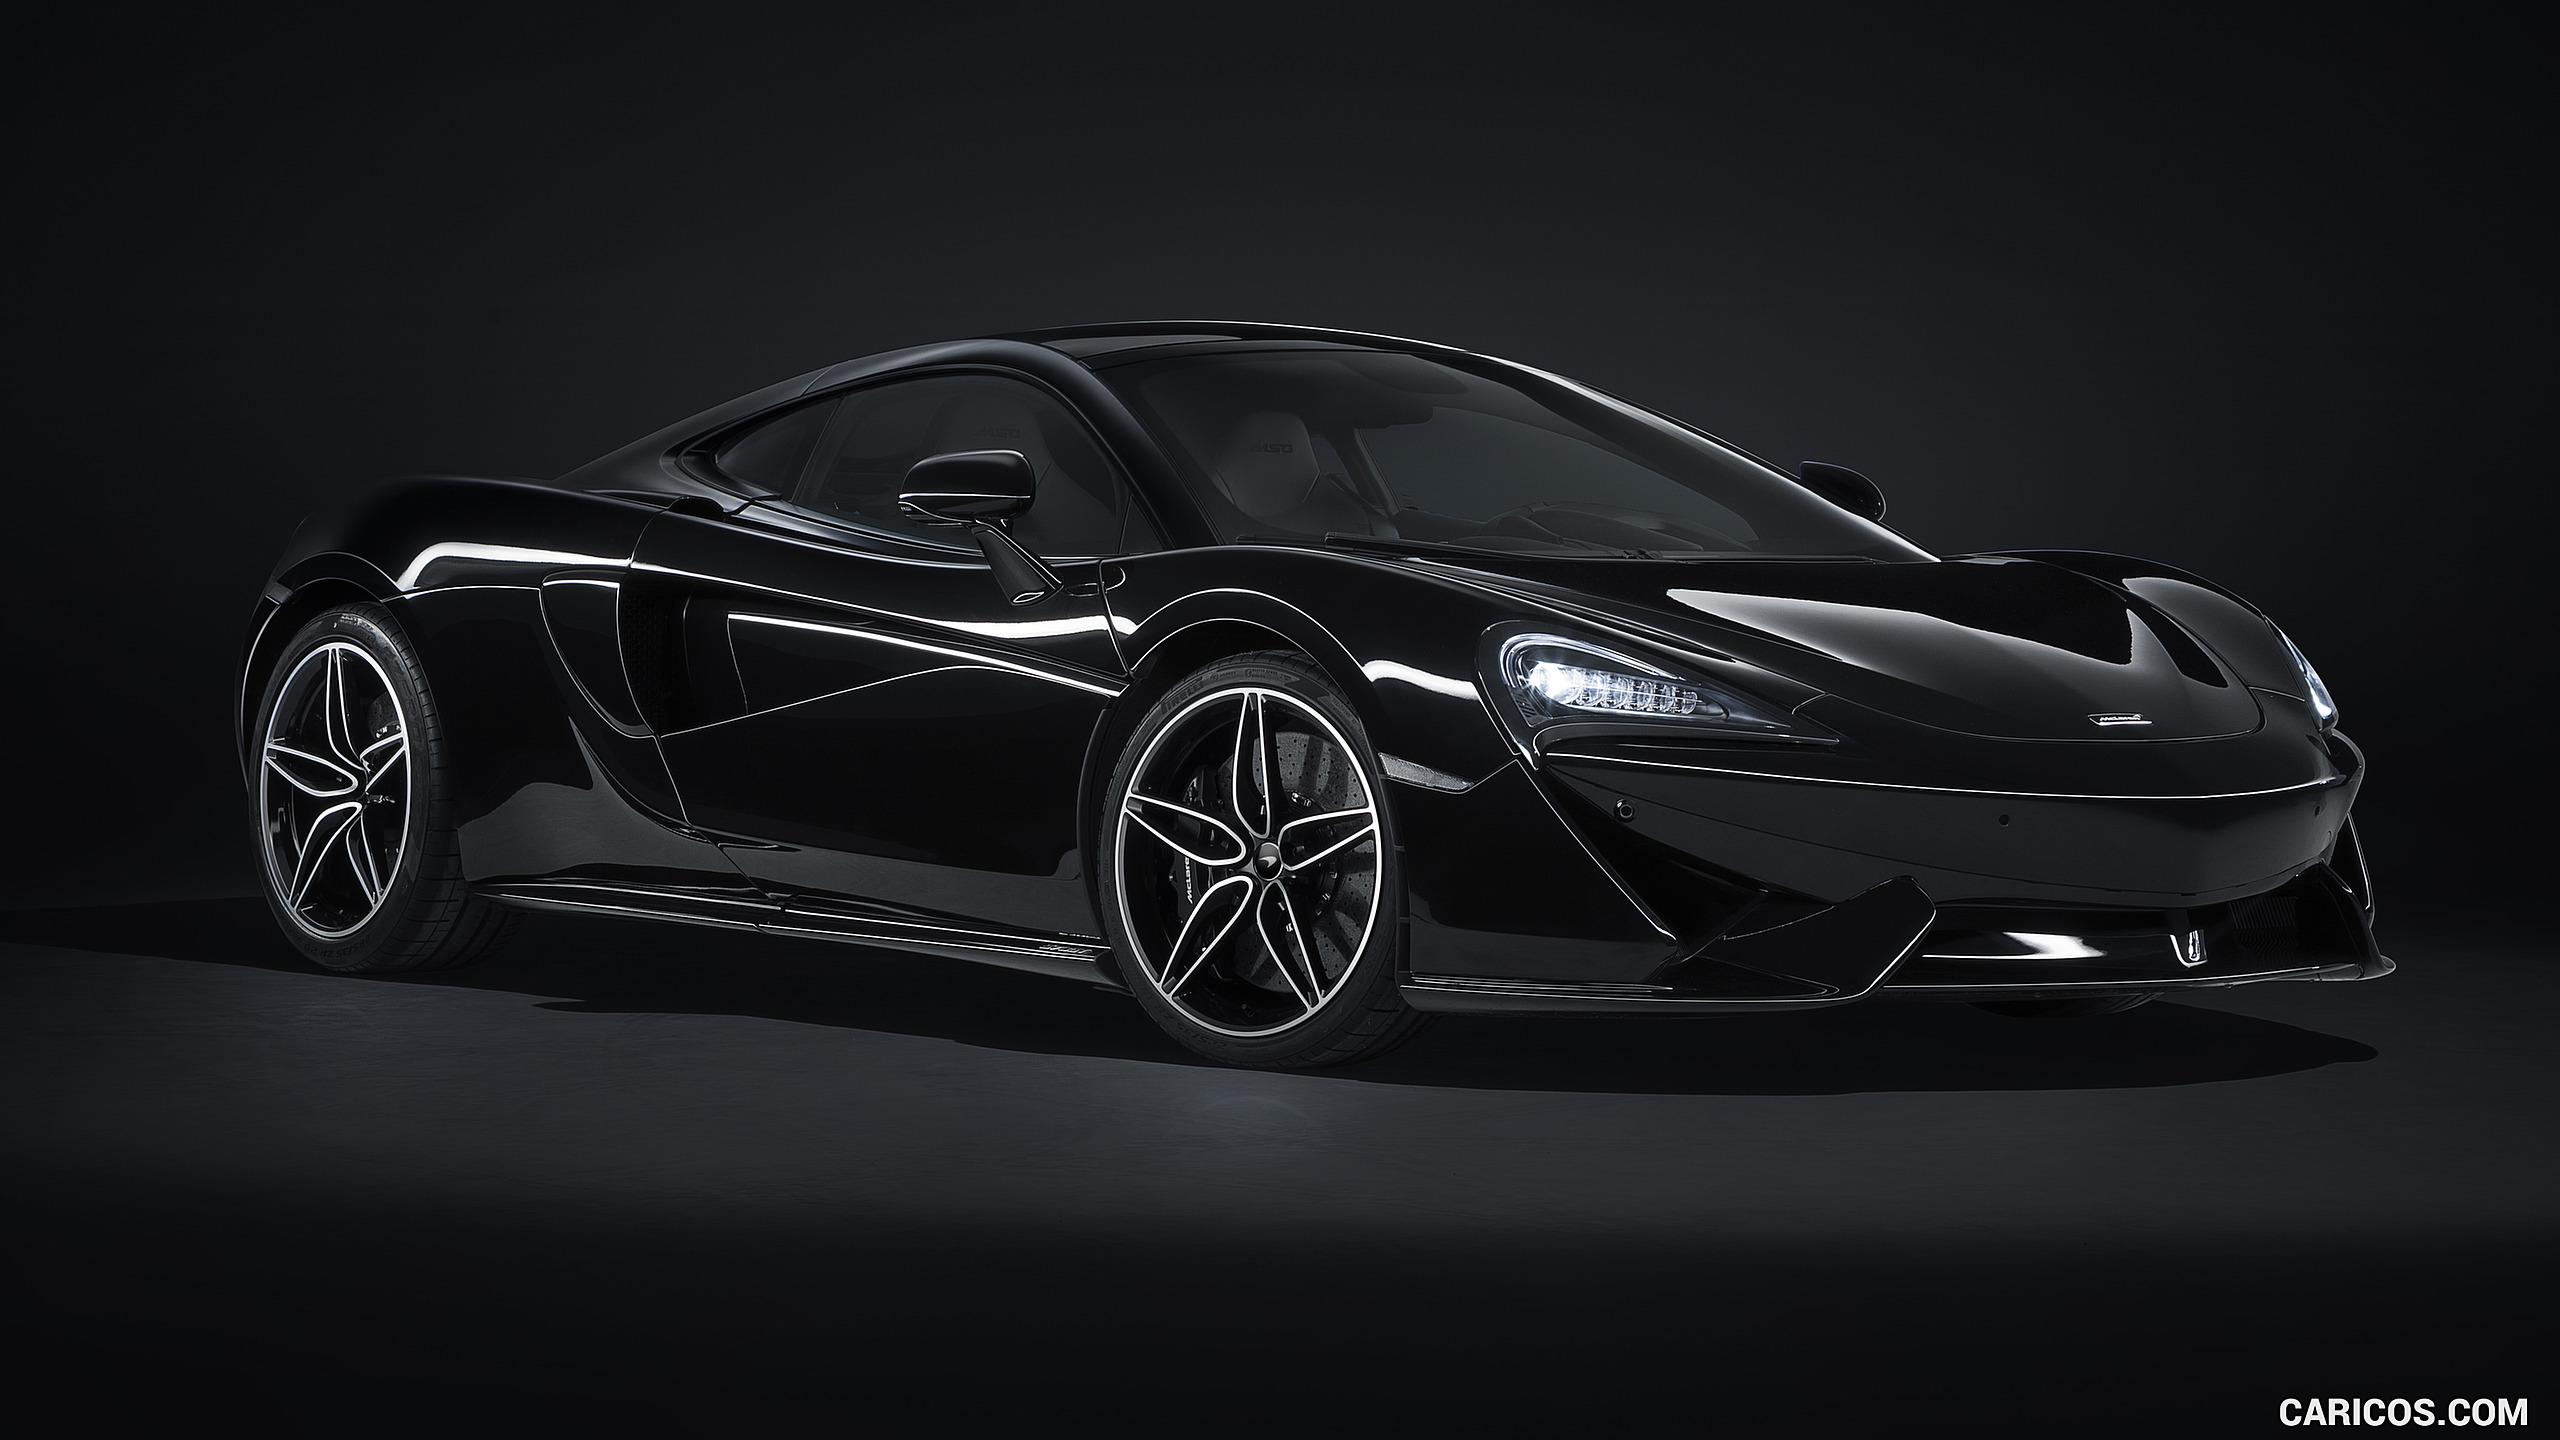 2018 McLaren 570GT MSO Black Collection - Front Three-Quarter, #1 of 10